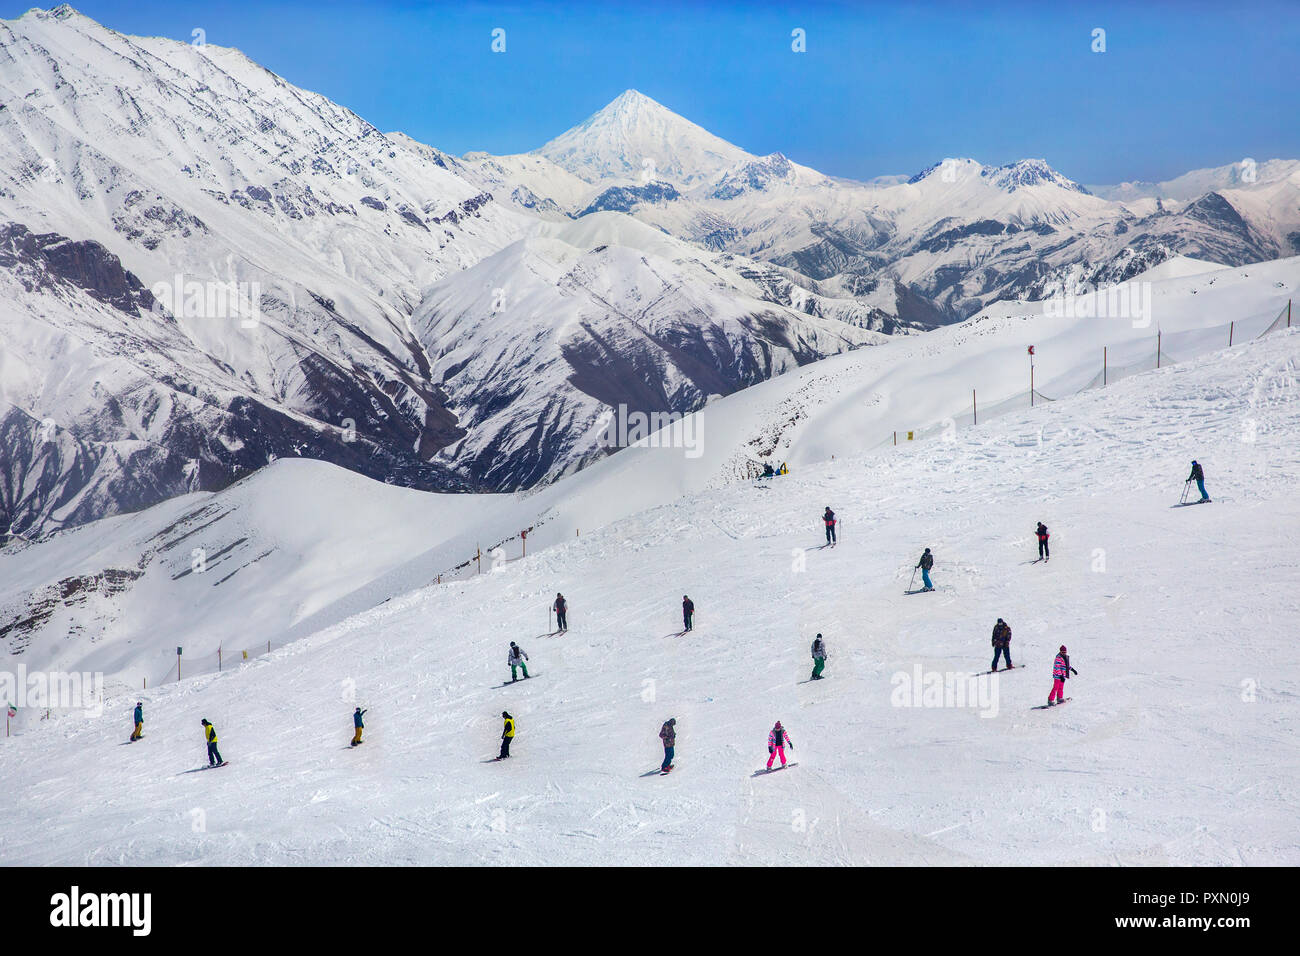 The view of skiers and Mount Damavand from Dizin ski resort in Tehran, Iran. Stock Photo